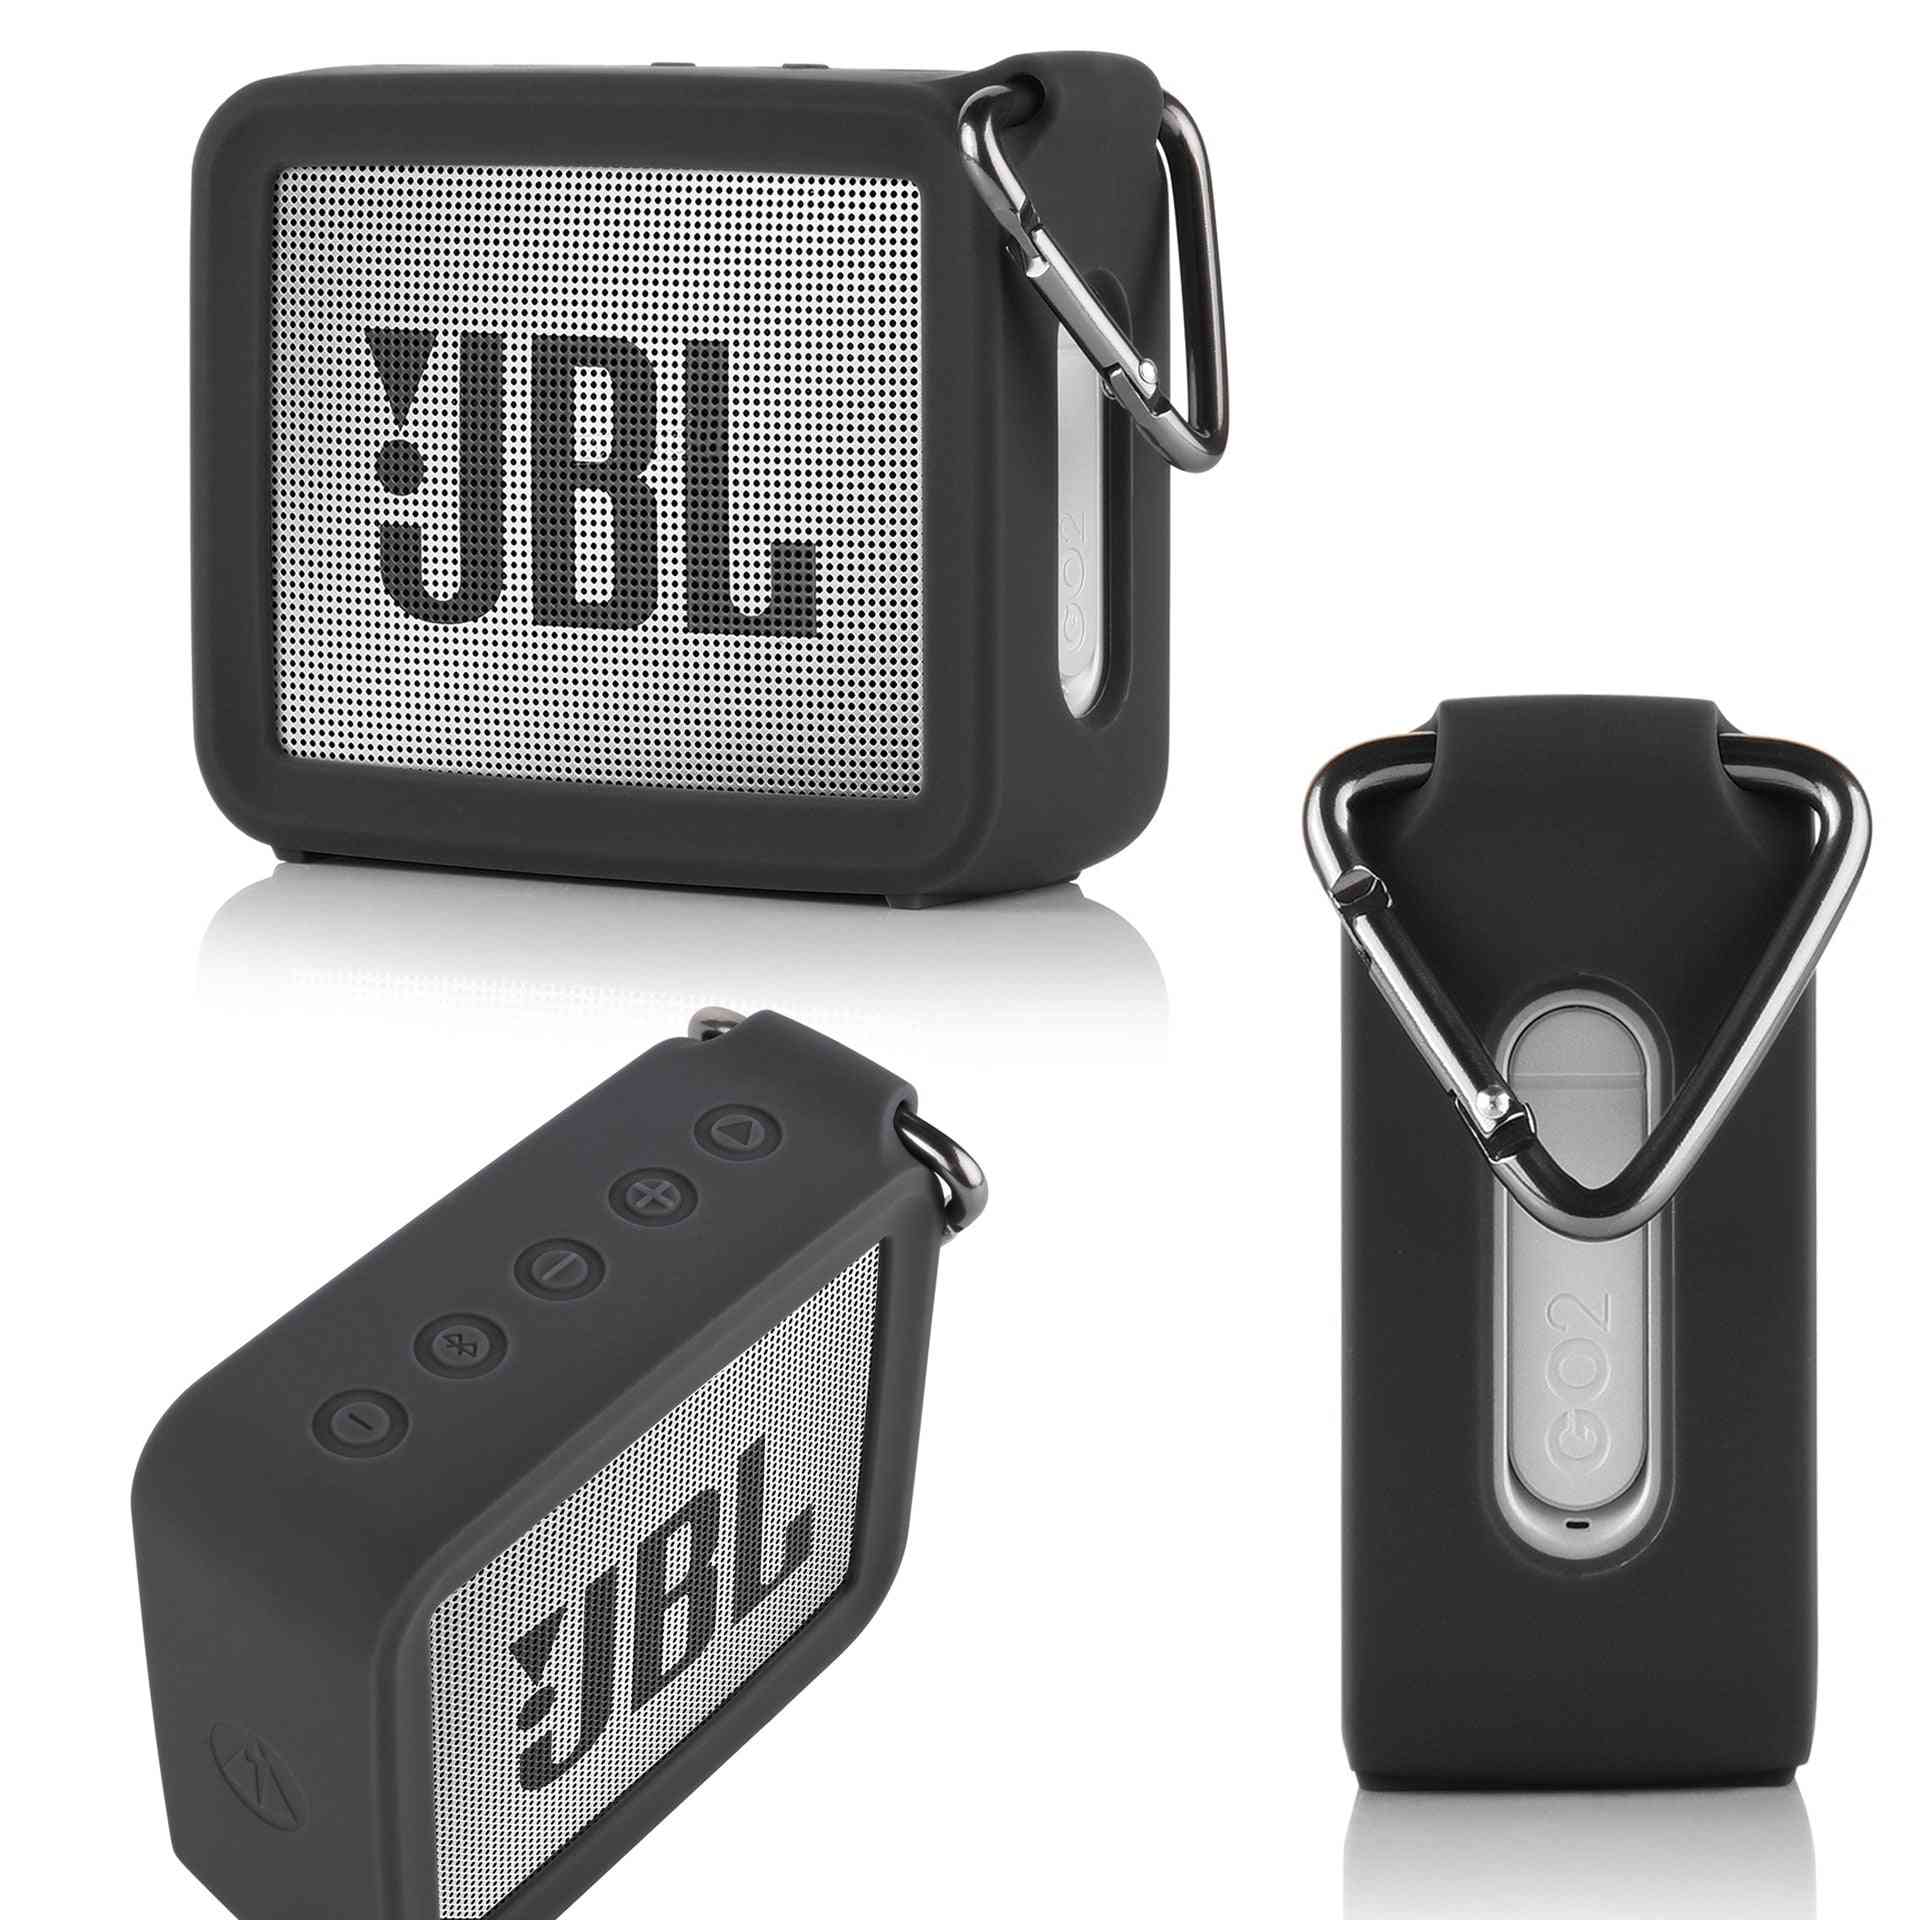 Portable Silicone Travel Case For Jbl Go2 Bluetooth Speaker